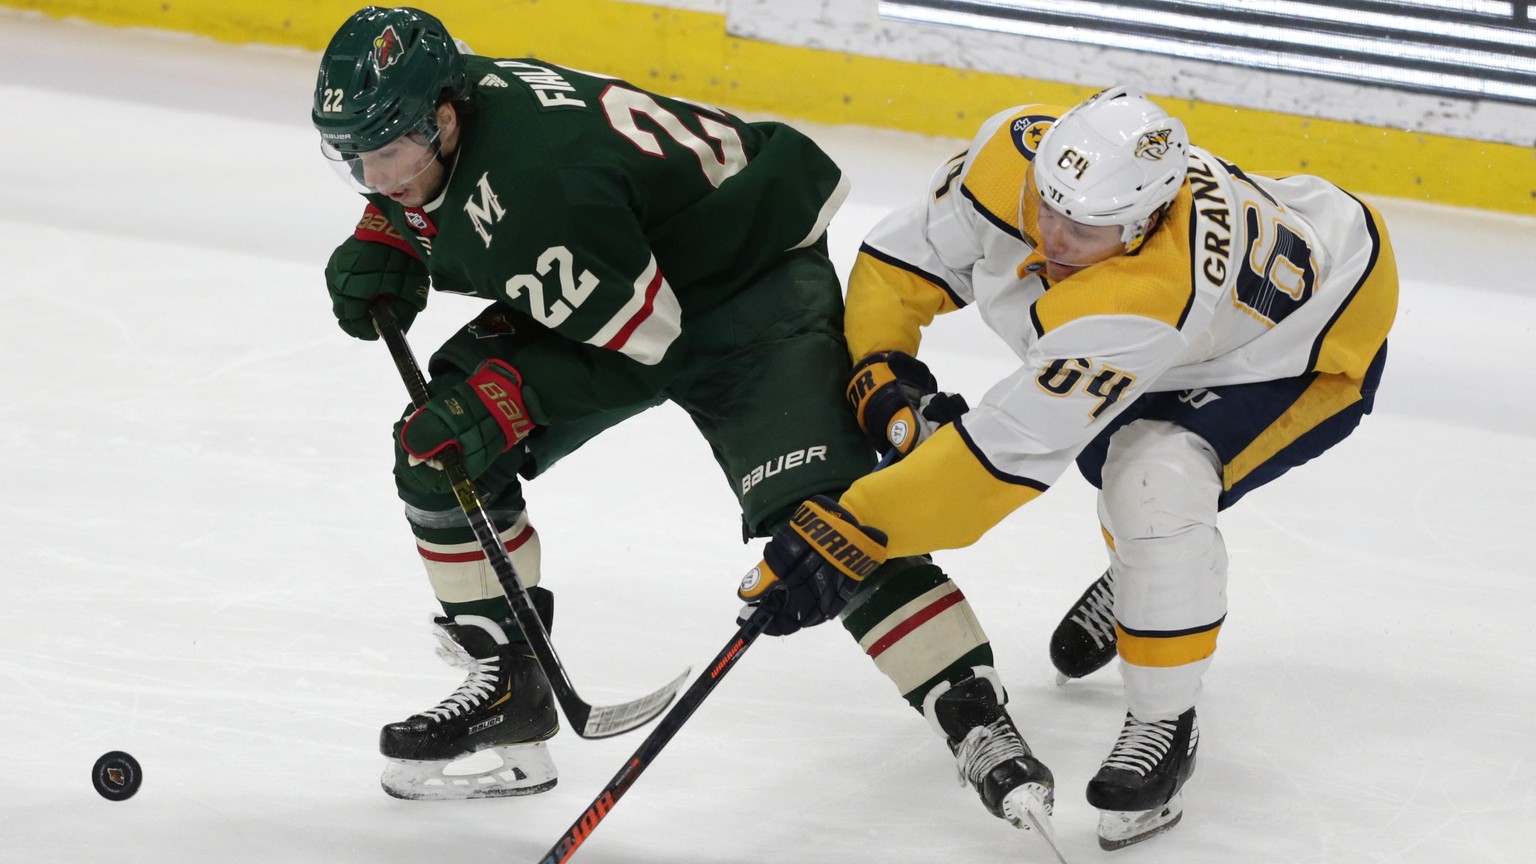 Minnesota Wild left wing Kevin Fiala (22) battles for the puck with Nashville Predators center Mikael Granlund (64) during the third period of an NHL hockey game Tuesday, March 3, 2020, in St. Paul, M ...